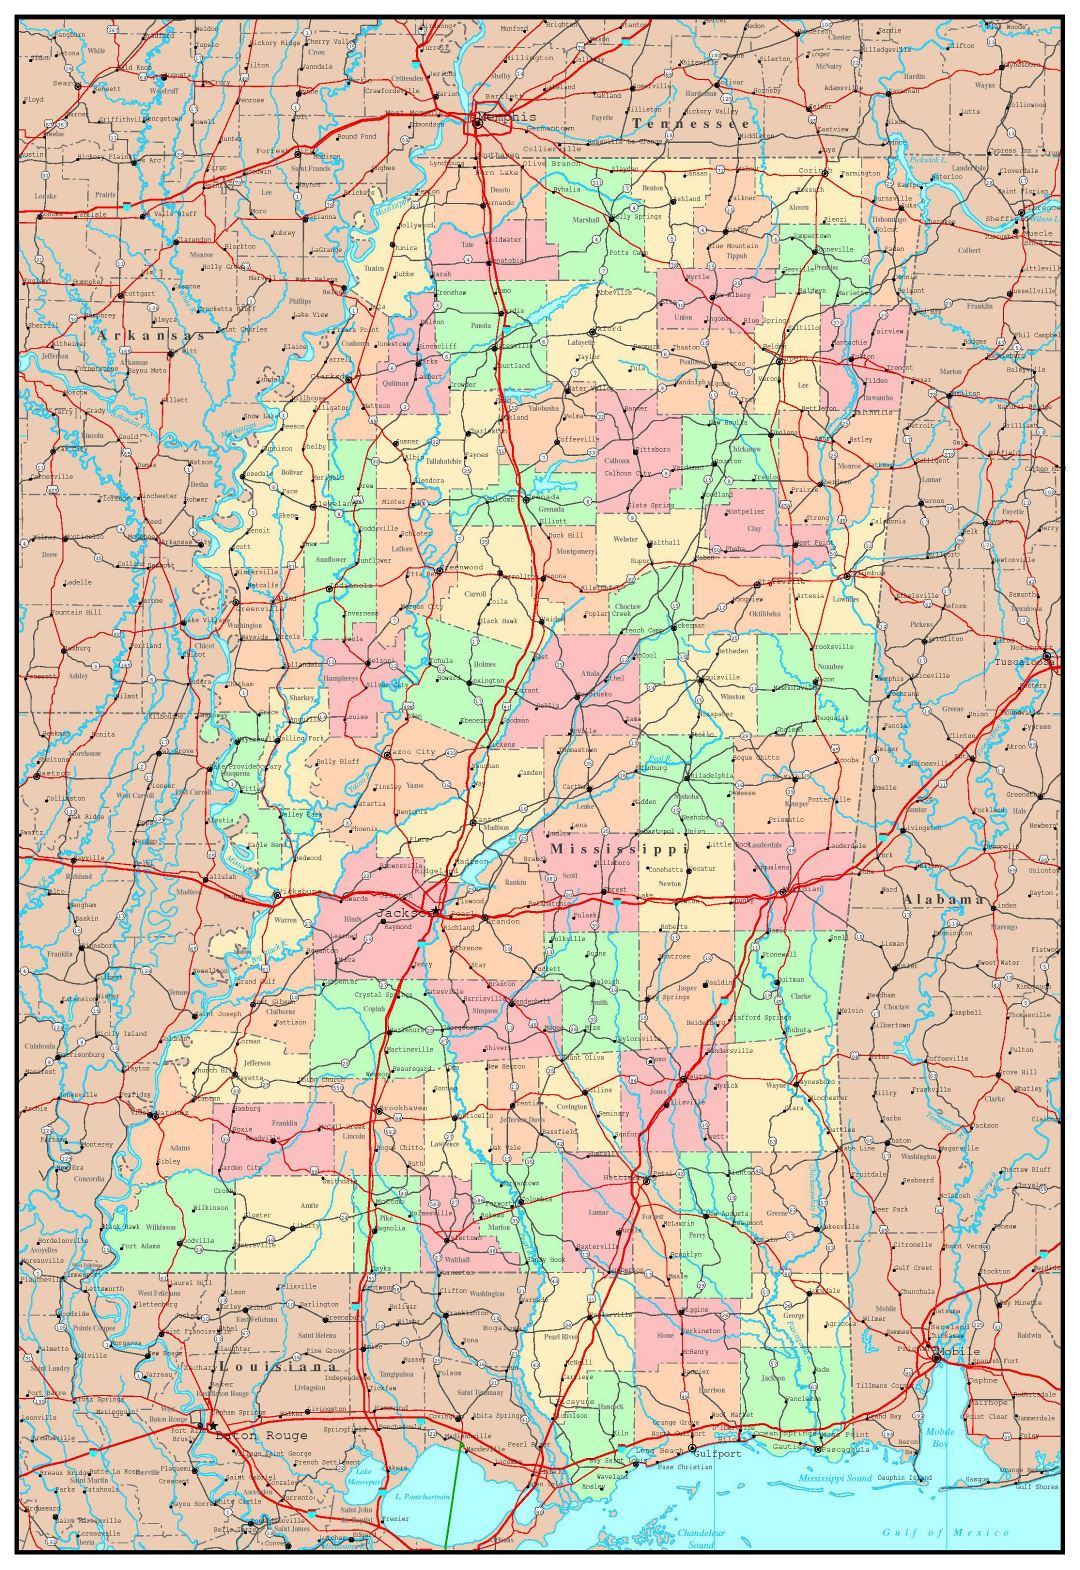 Large detailed administrative map of Mississippi state with roads, highways and major cities